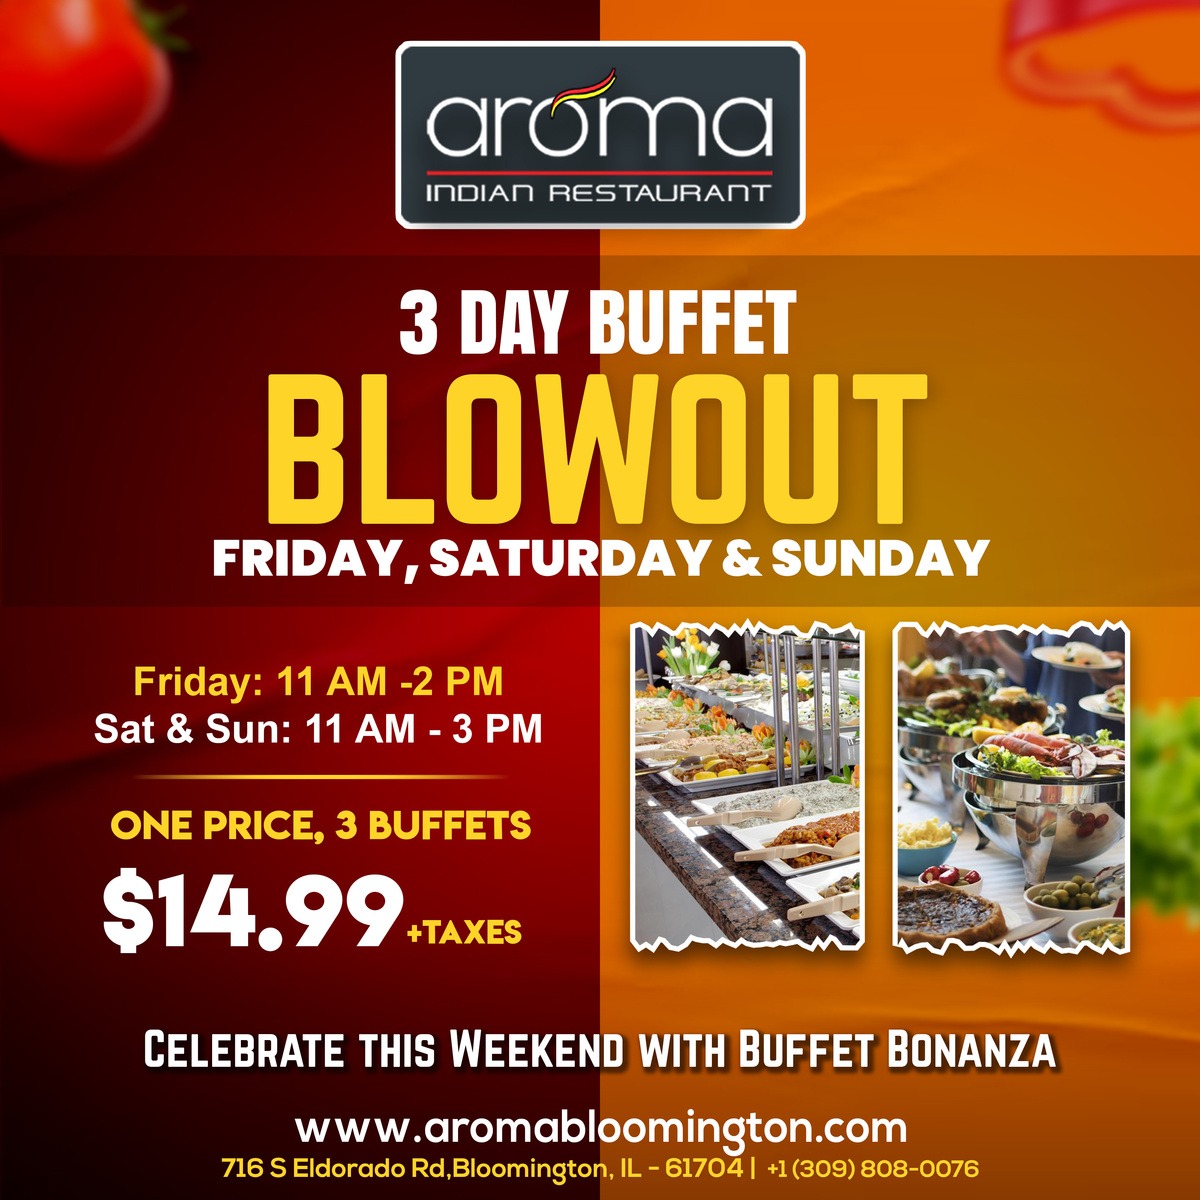 3 Day Buffet Blow out